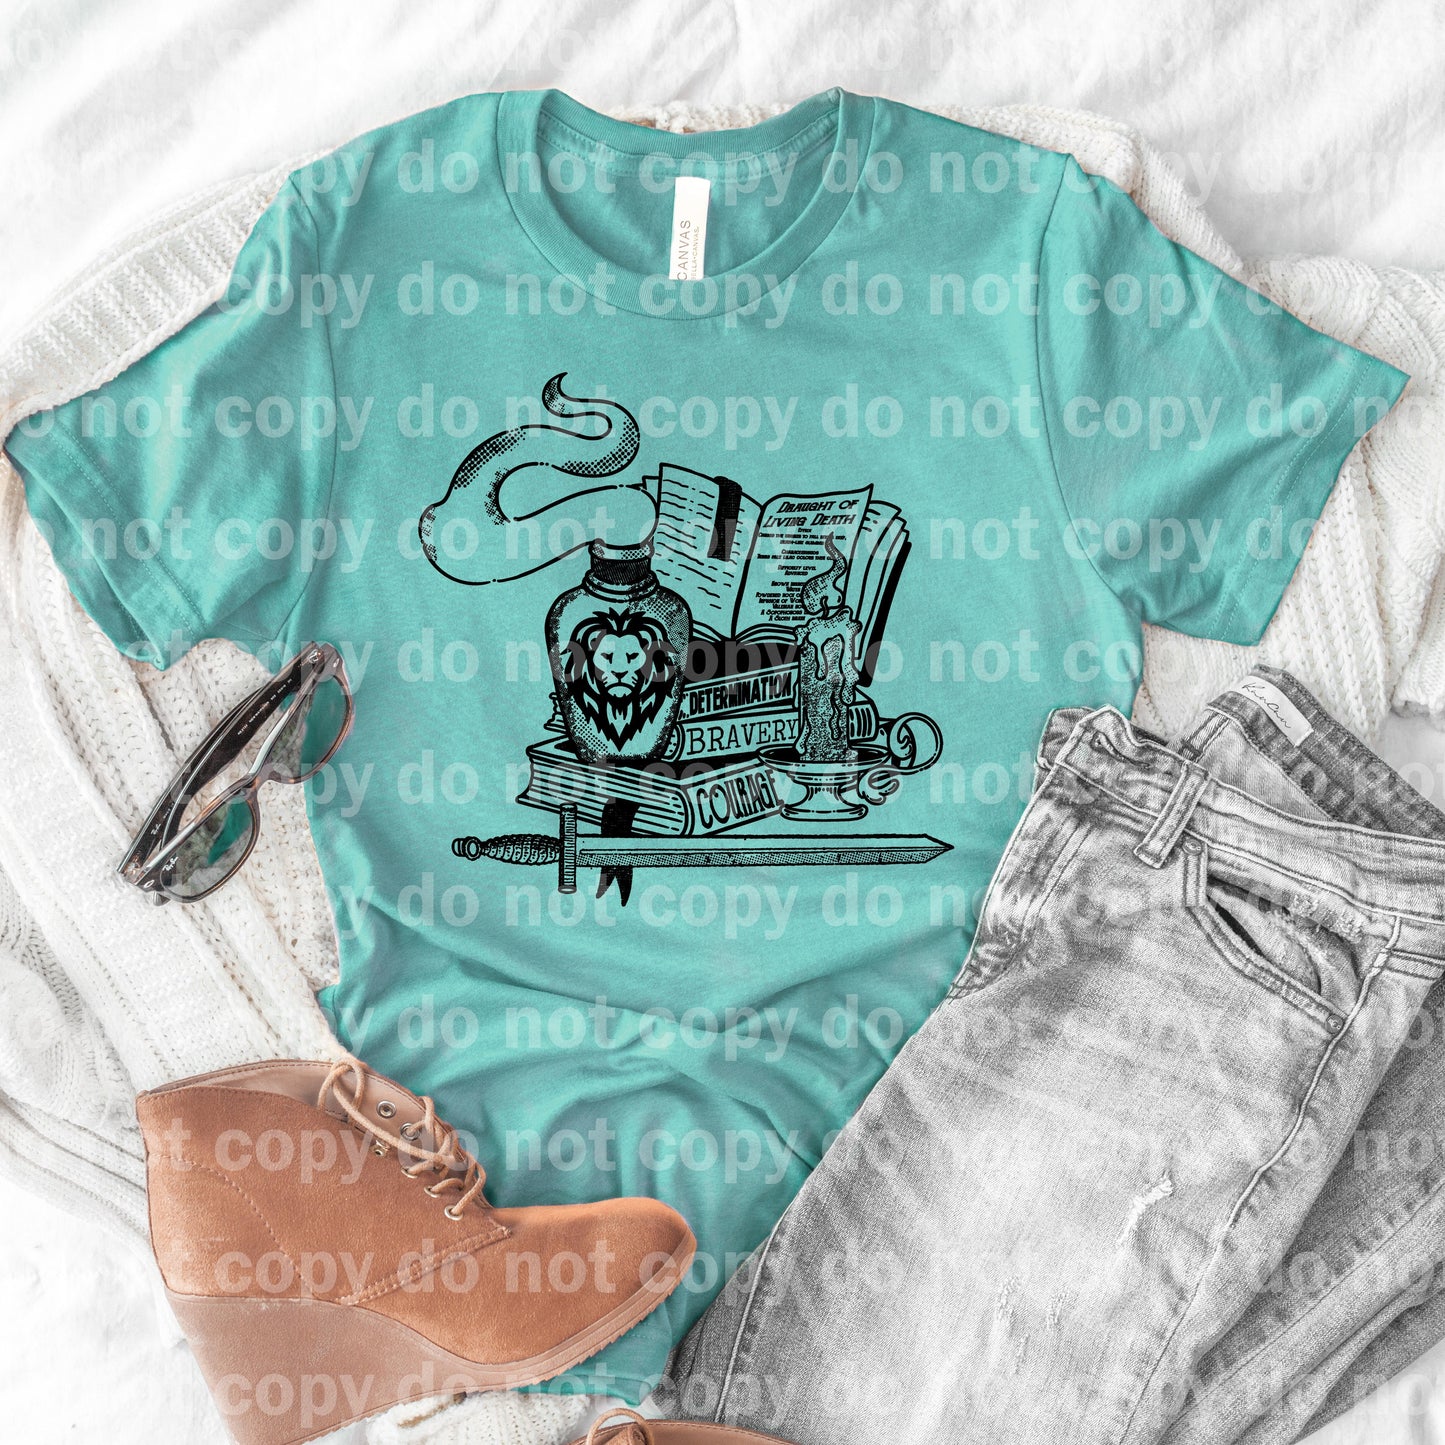 Hp magical Determination Bravery Courage Full Color/One Color Dream Print or Sublimation Print